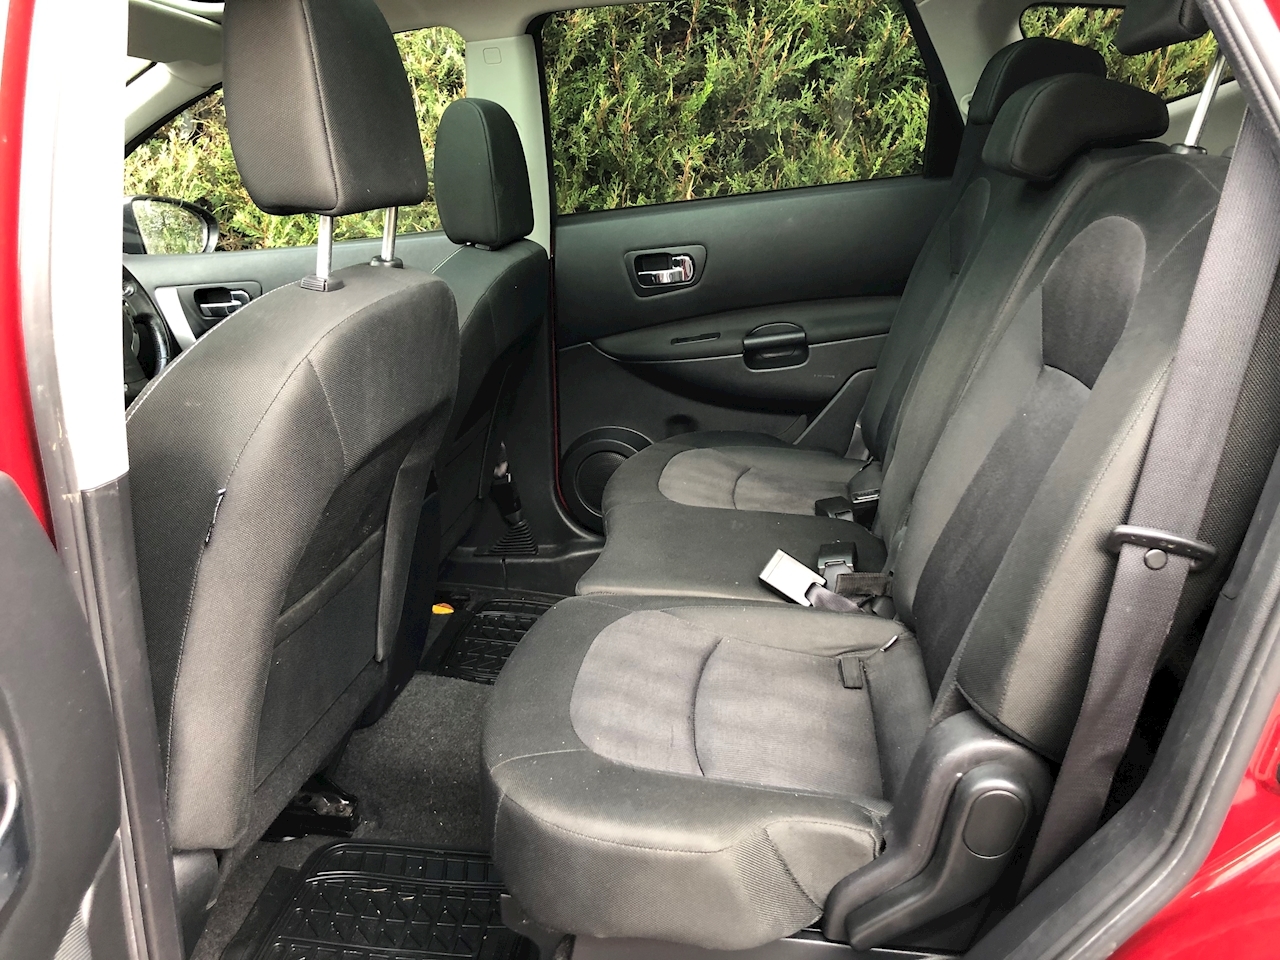 Nissan Qashqai 7 seater - Car Seat Upholstery